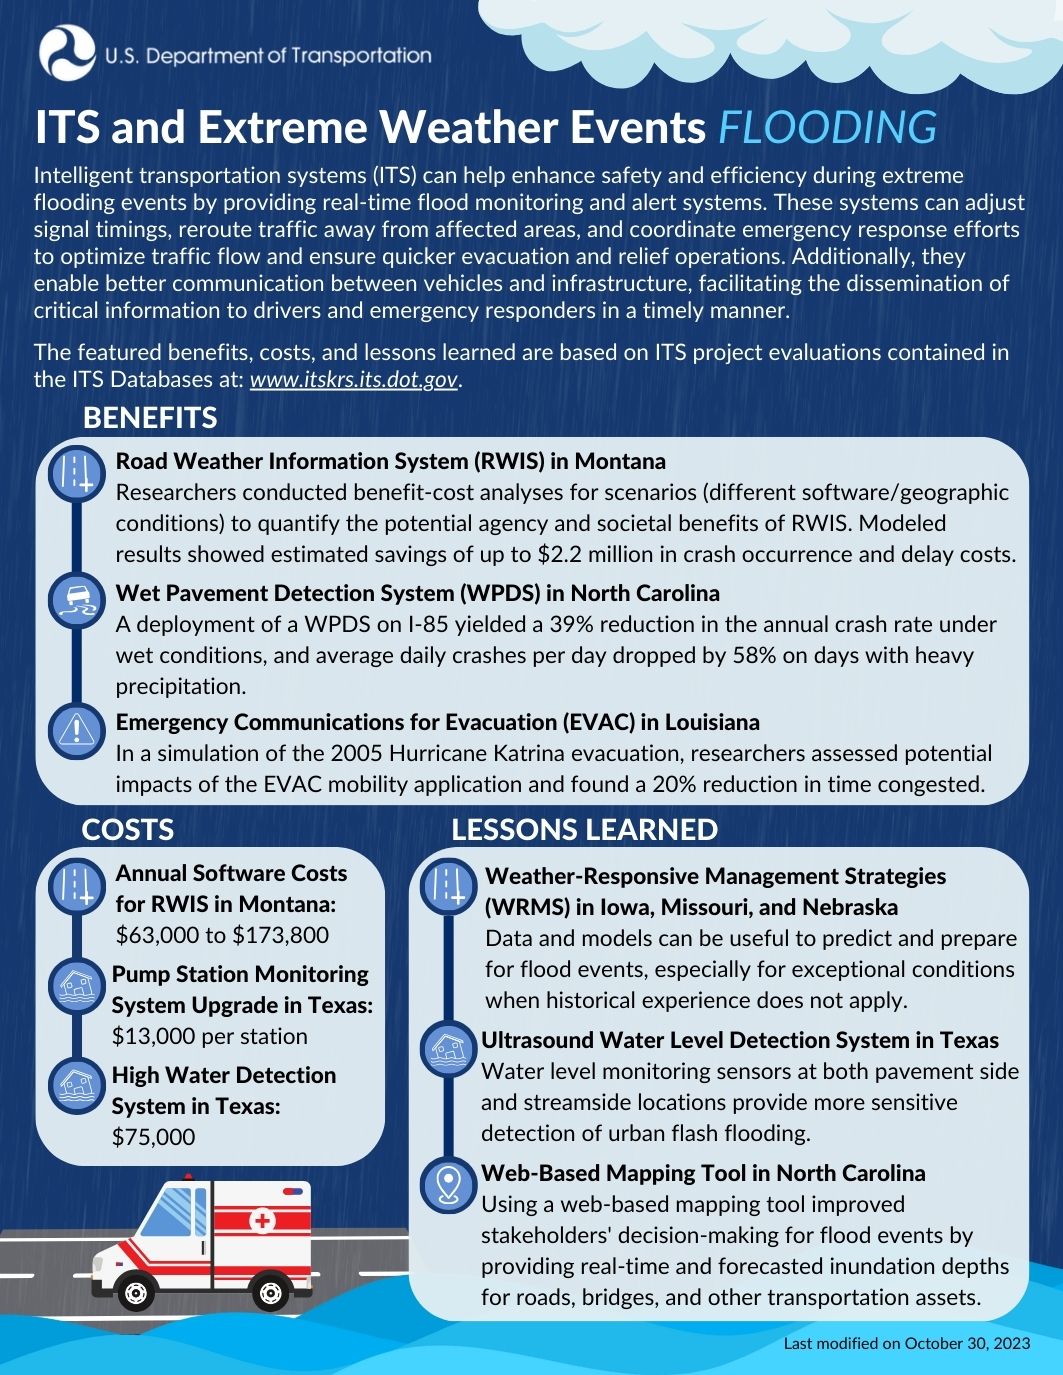 Infographic depicting examples of ITS for extreme flooding events, including a road weather information system (RWIS) in Montana, a wet pavement detection system (WPDS) in North Carolina, and emergency communications for evacuation (EVAC) in Louisiana. 